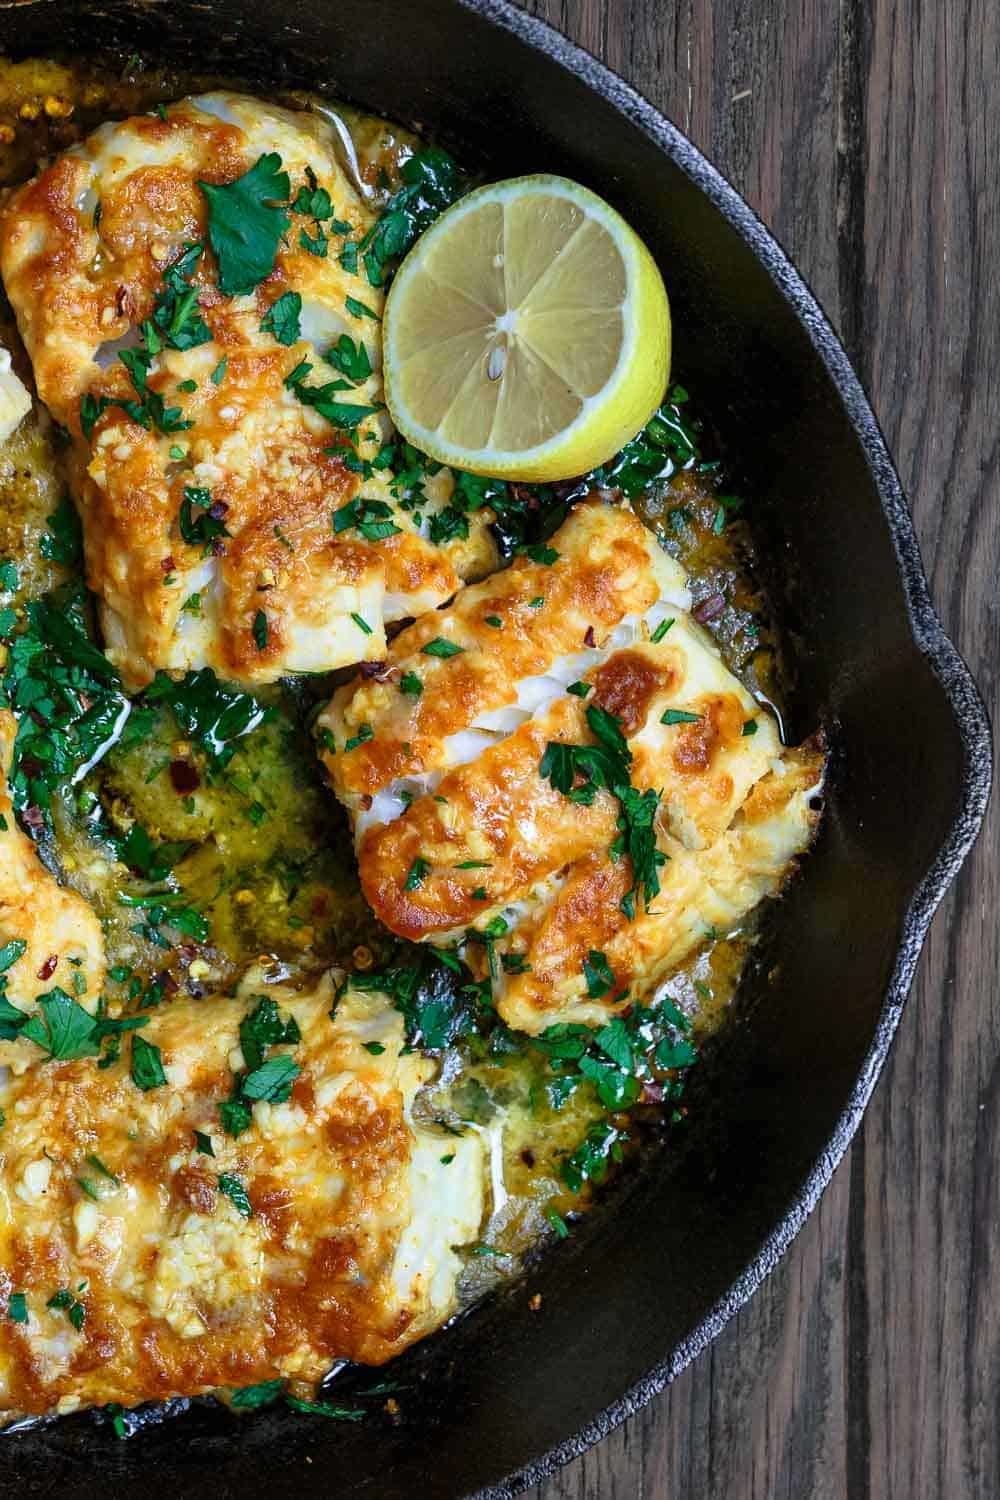 Skillet with cooked chicken, garnished with herbs and lemon slice